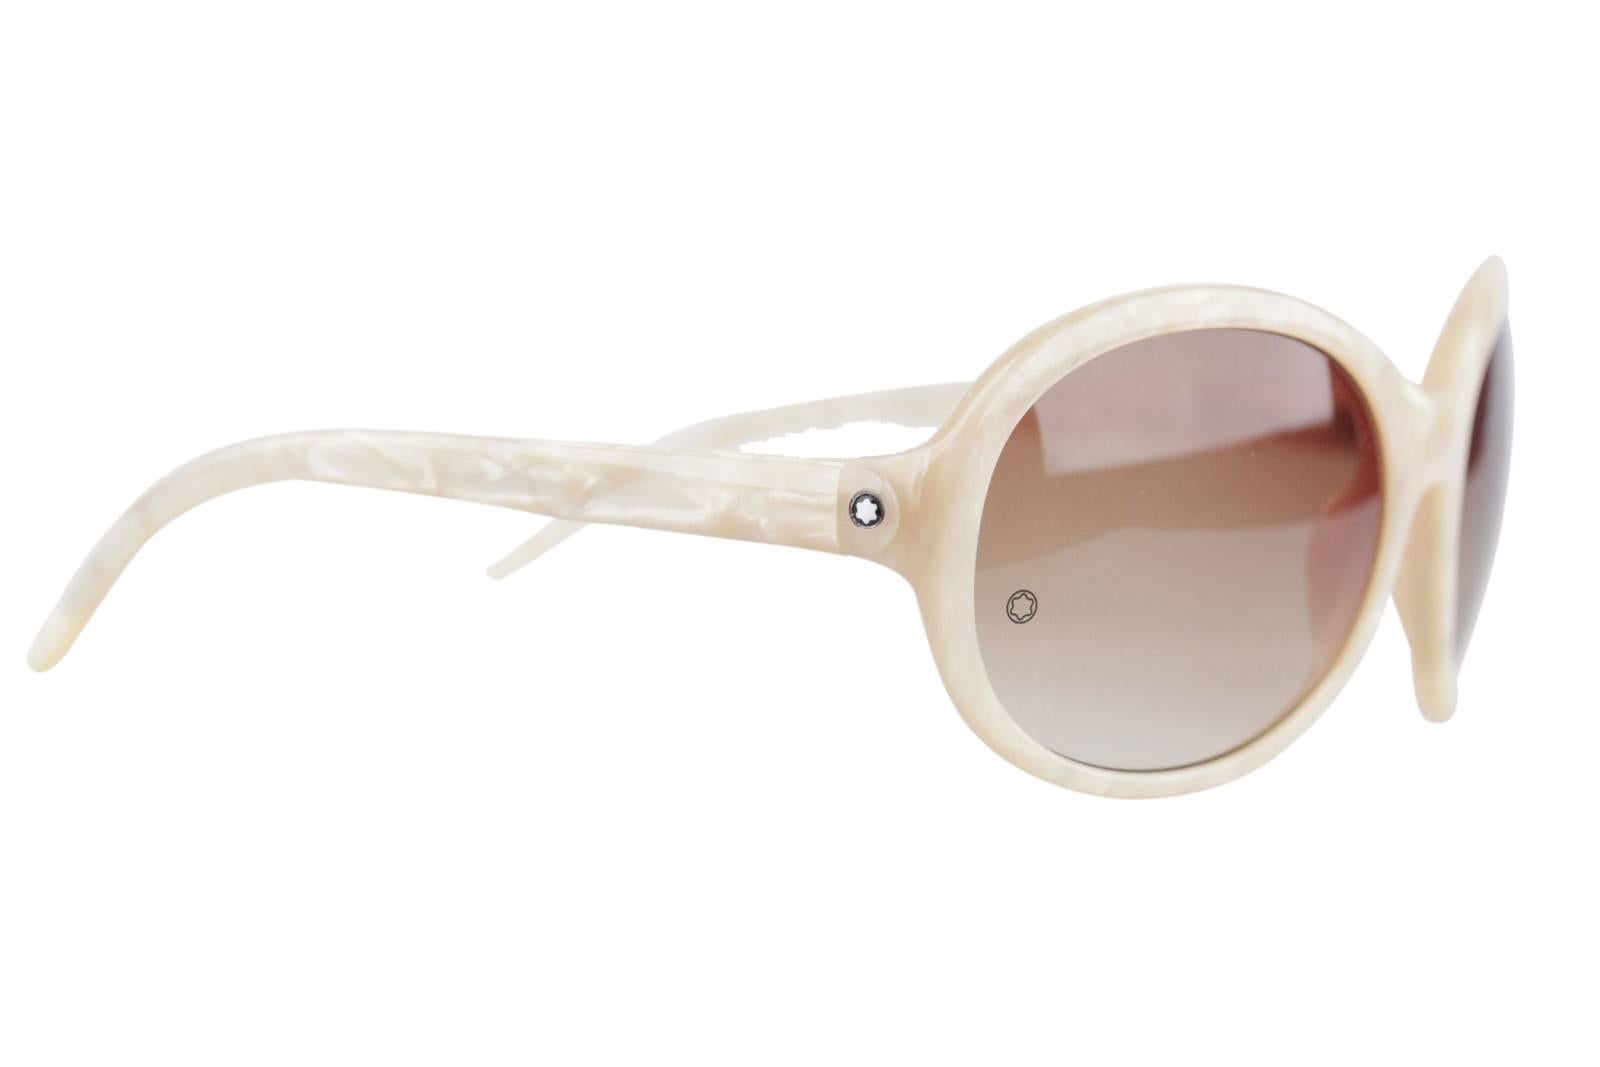 - Women sunglasses, signed MONTBLANC (Made in Italy)

- Brown lgradient ens (original lens w/ MONTBLANC logo)

- 100% UV protection

- Ivory acetate frame

- MONTBLANC signatures on temples

Style name & model refs: MB 139S - T57 -